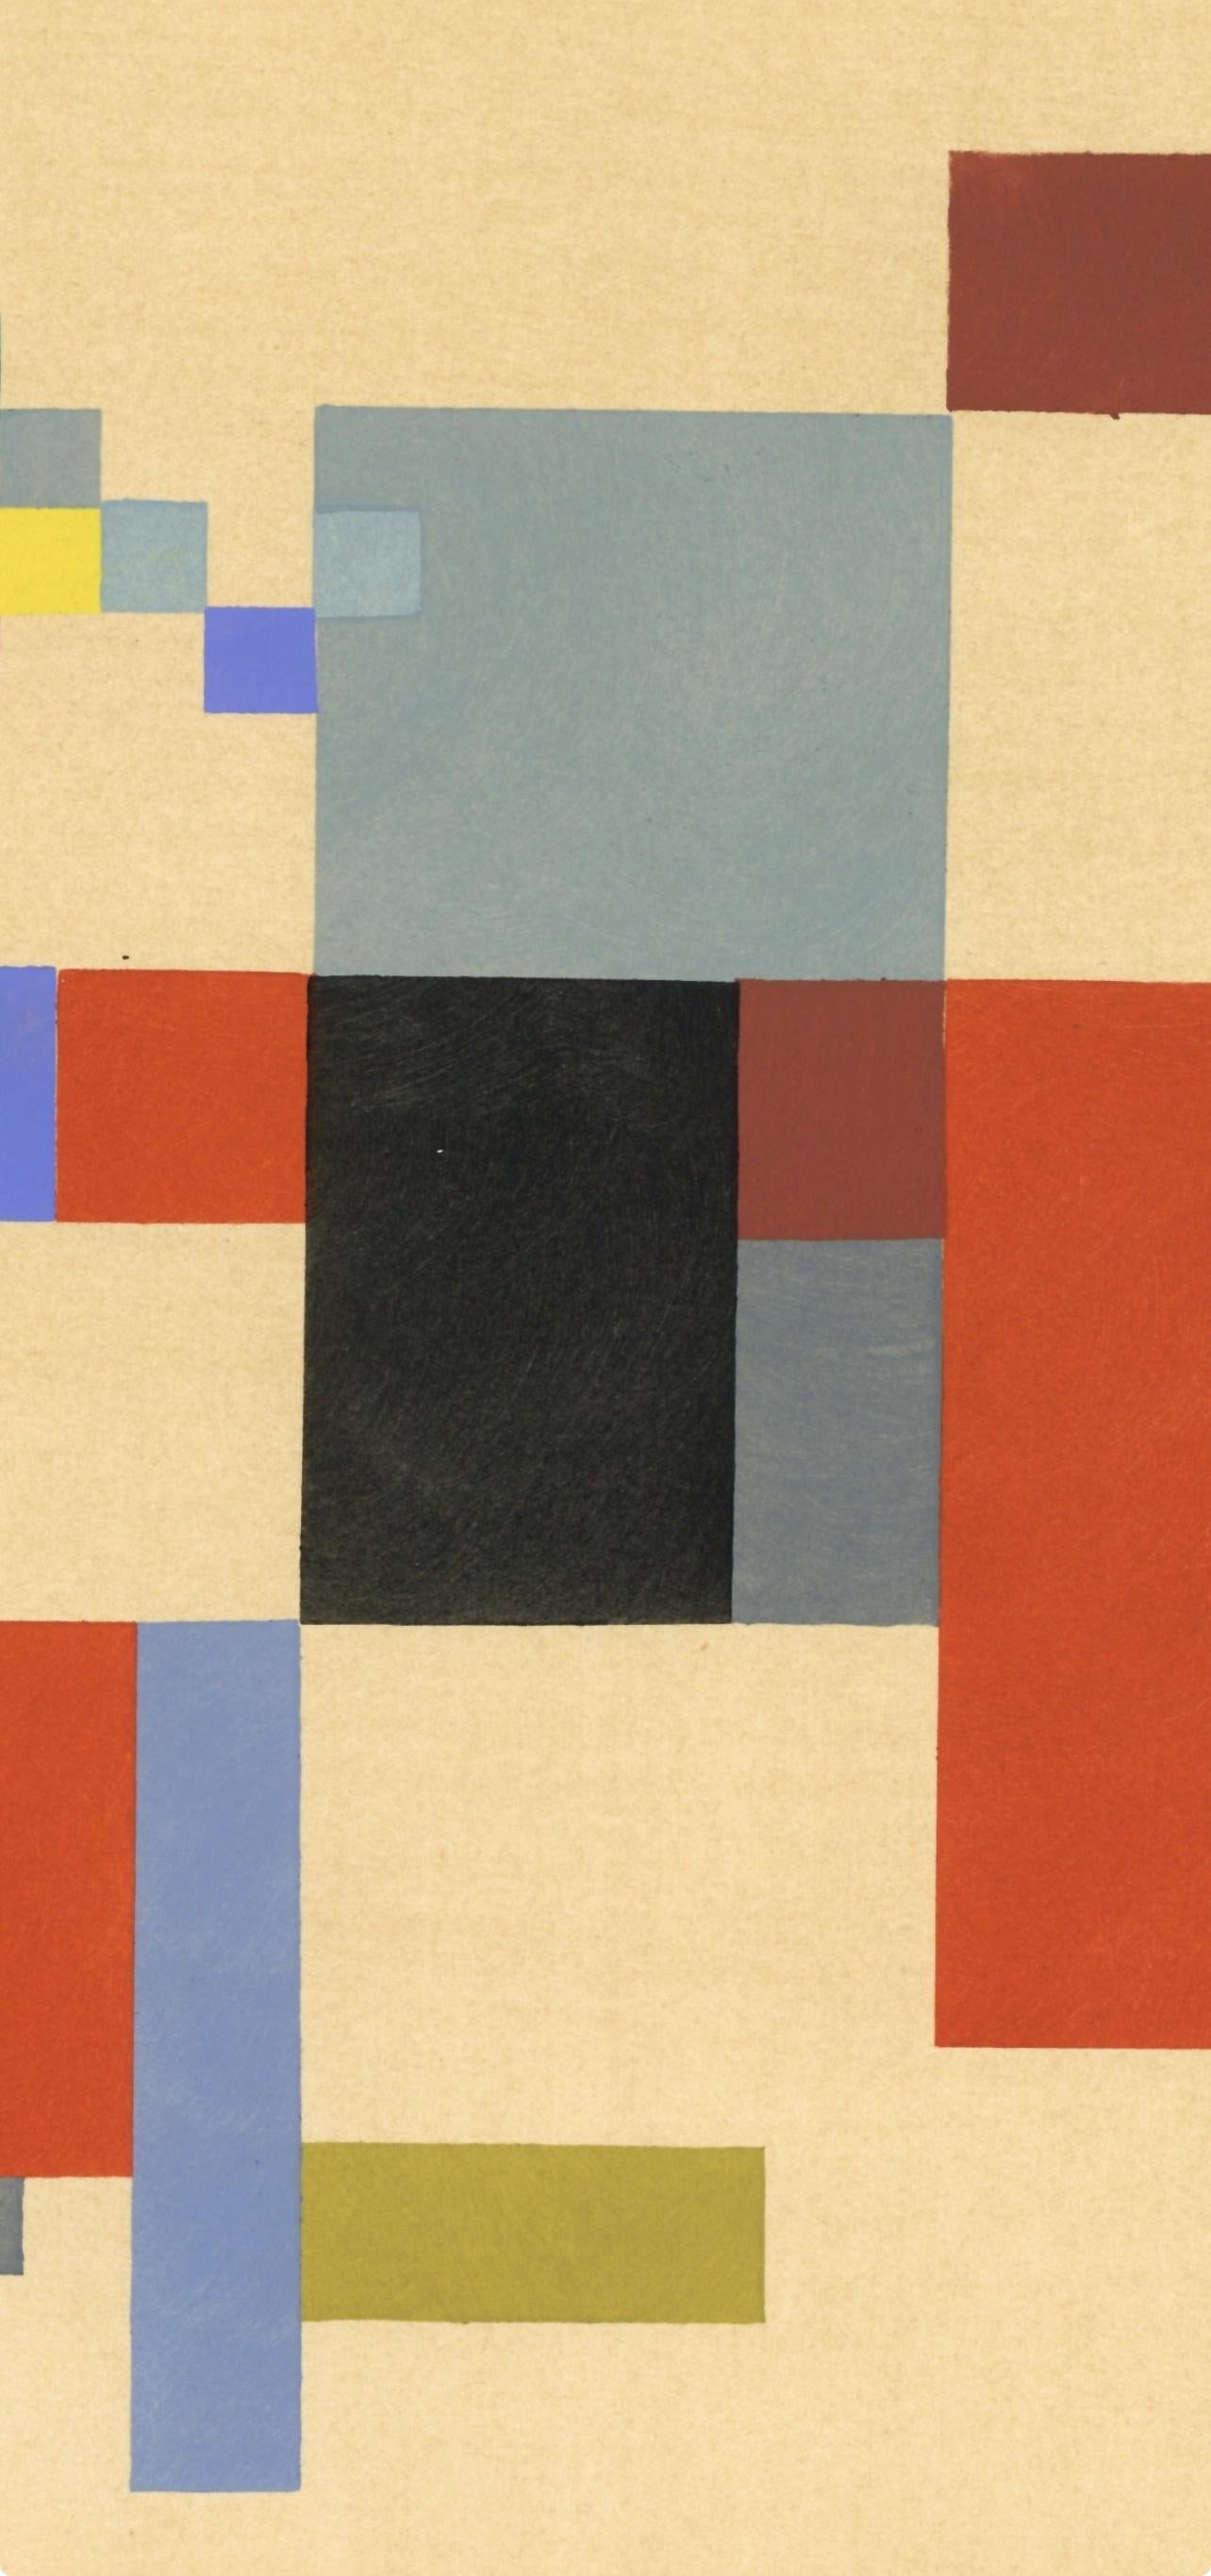 Taeuber-Arp, Composition, XXe Siècle (after) - Modern Print by Sophie Taeuber-Arp